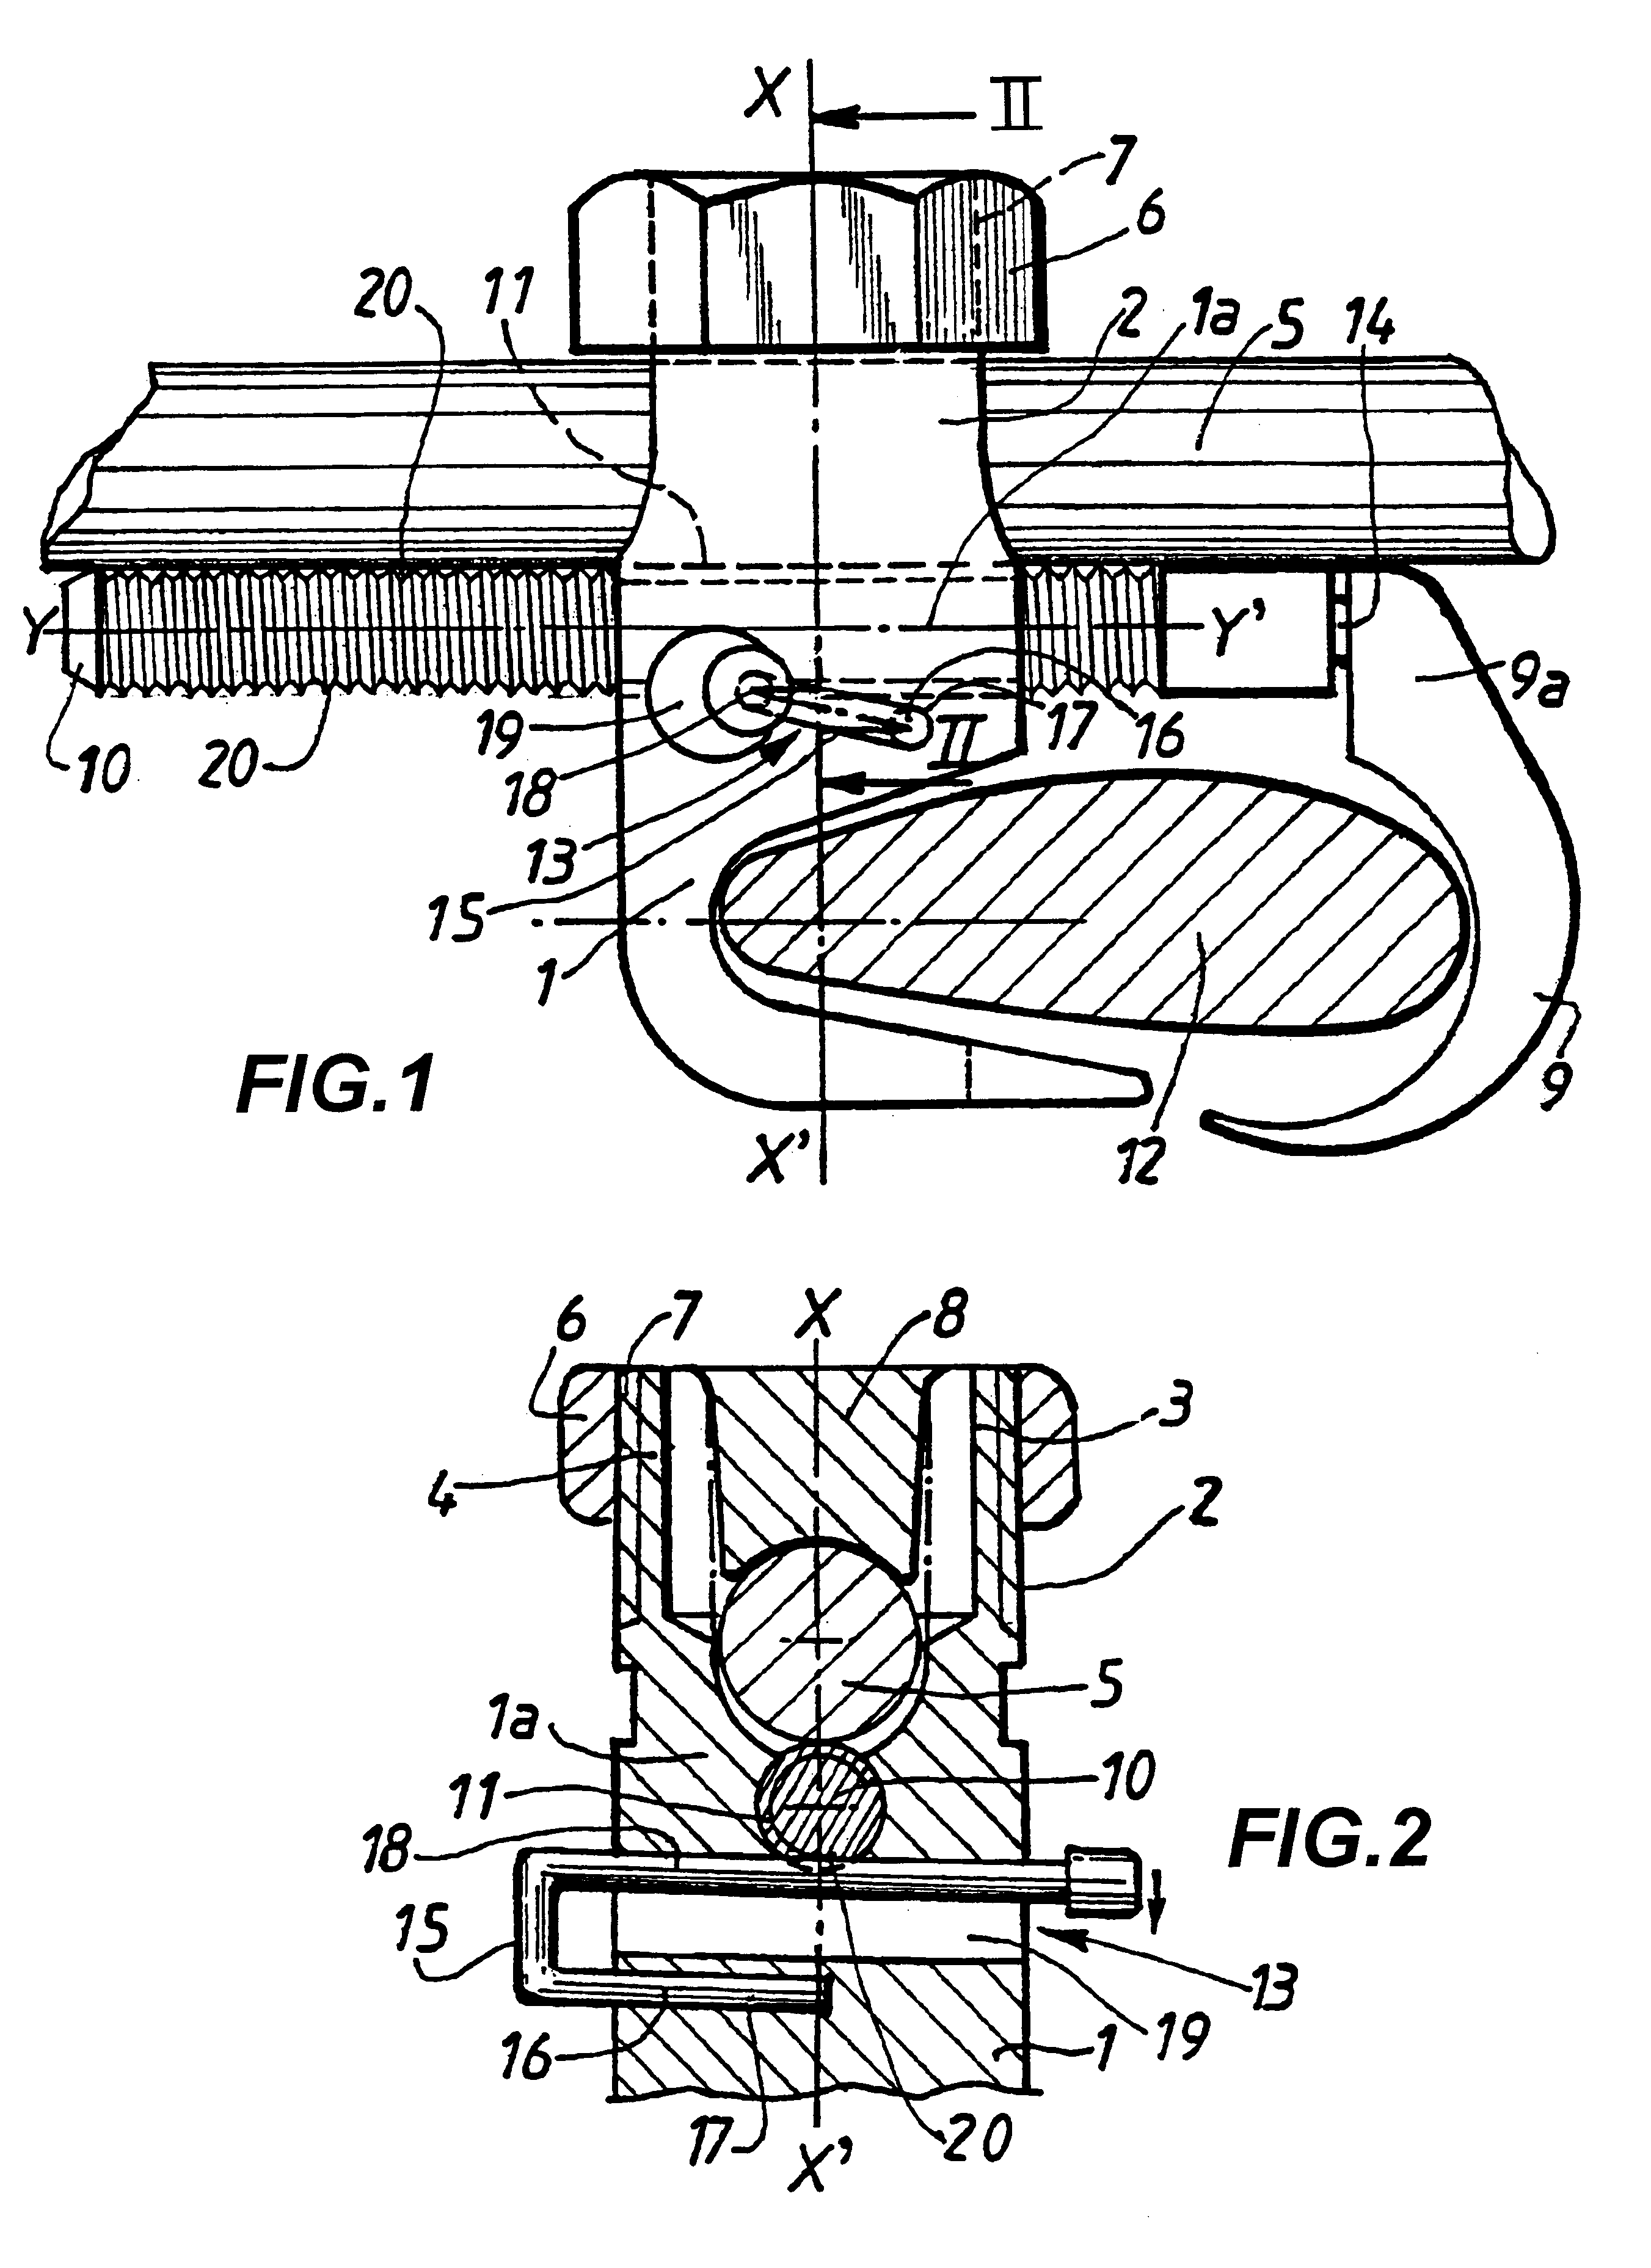 Implant for osteosynthesis device with hook